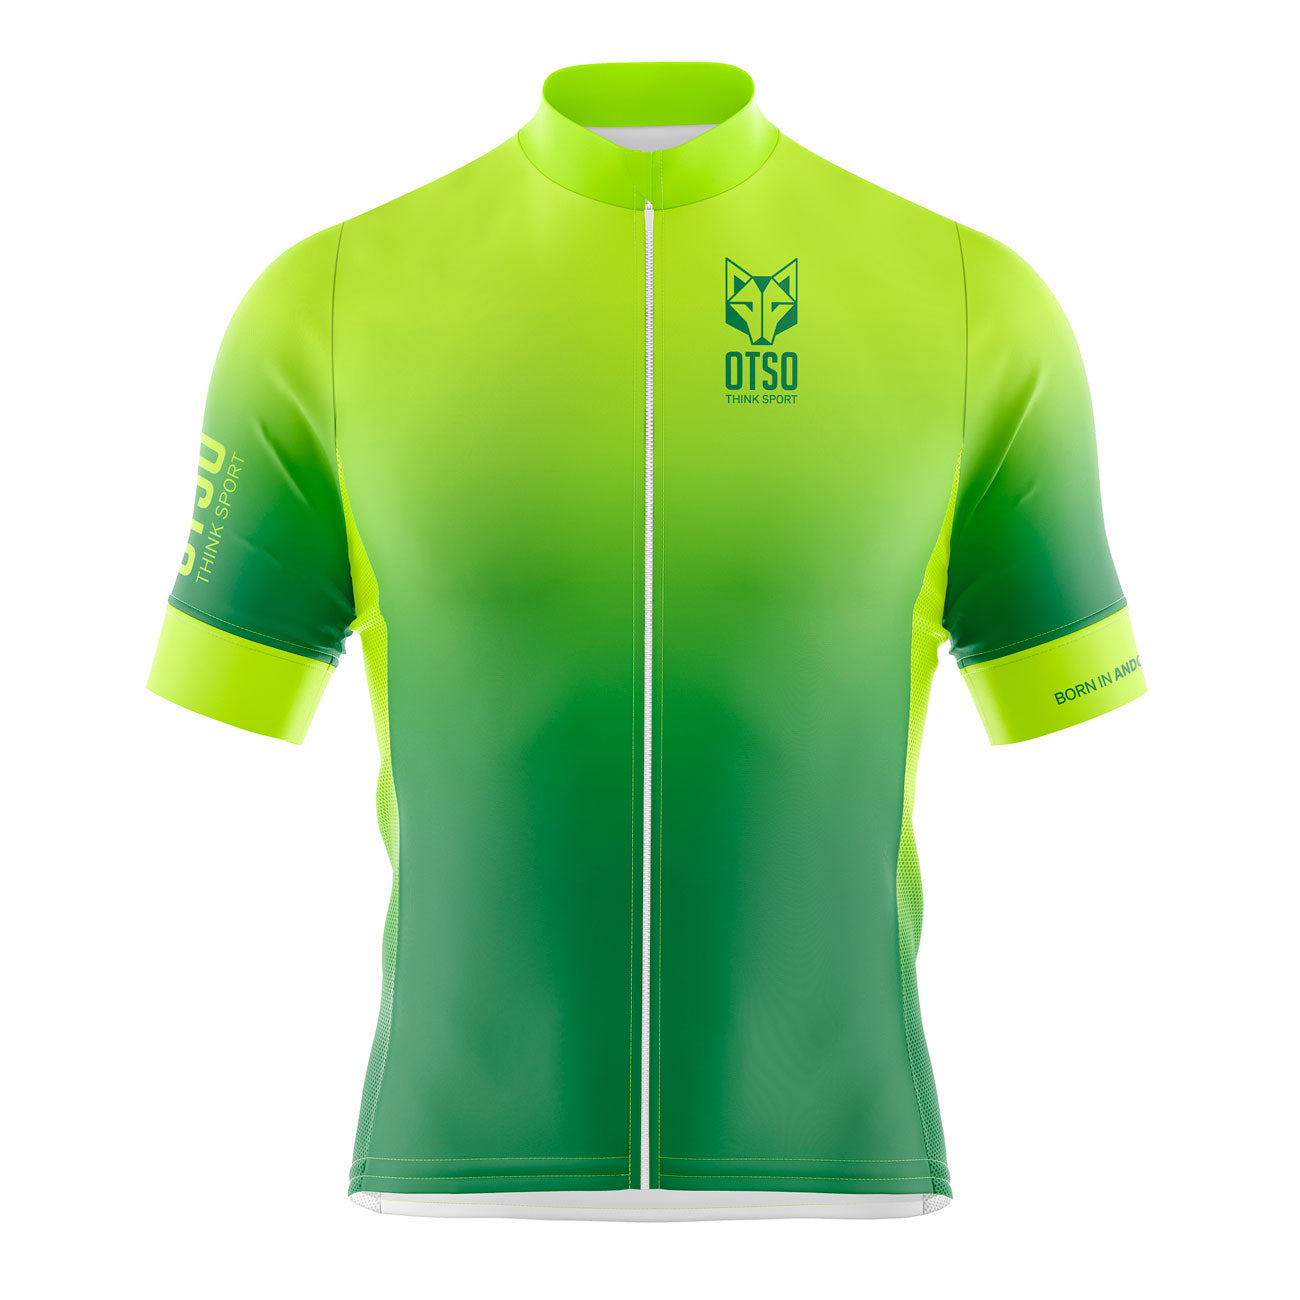 The Short Sleeve Cycling Jersey